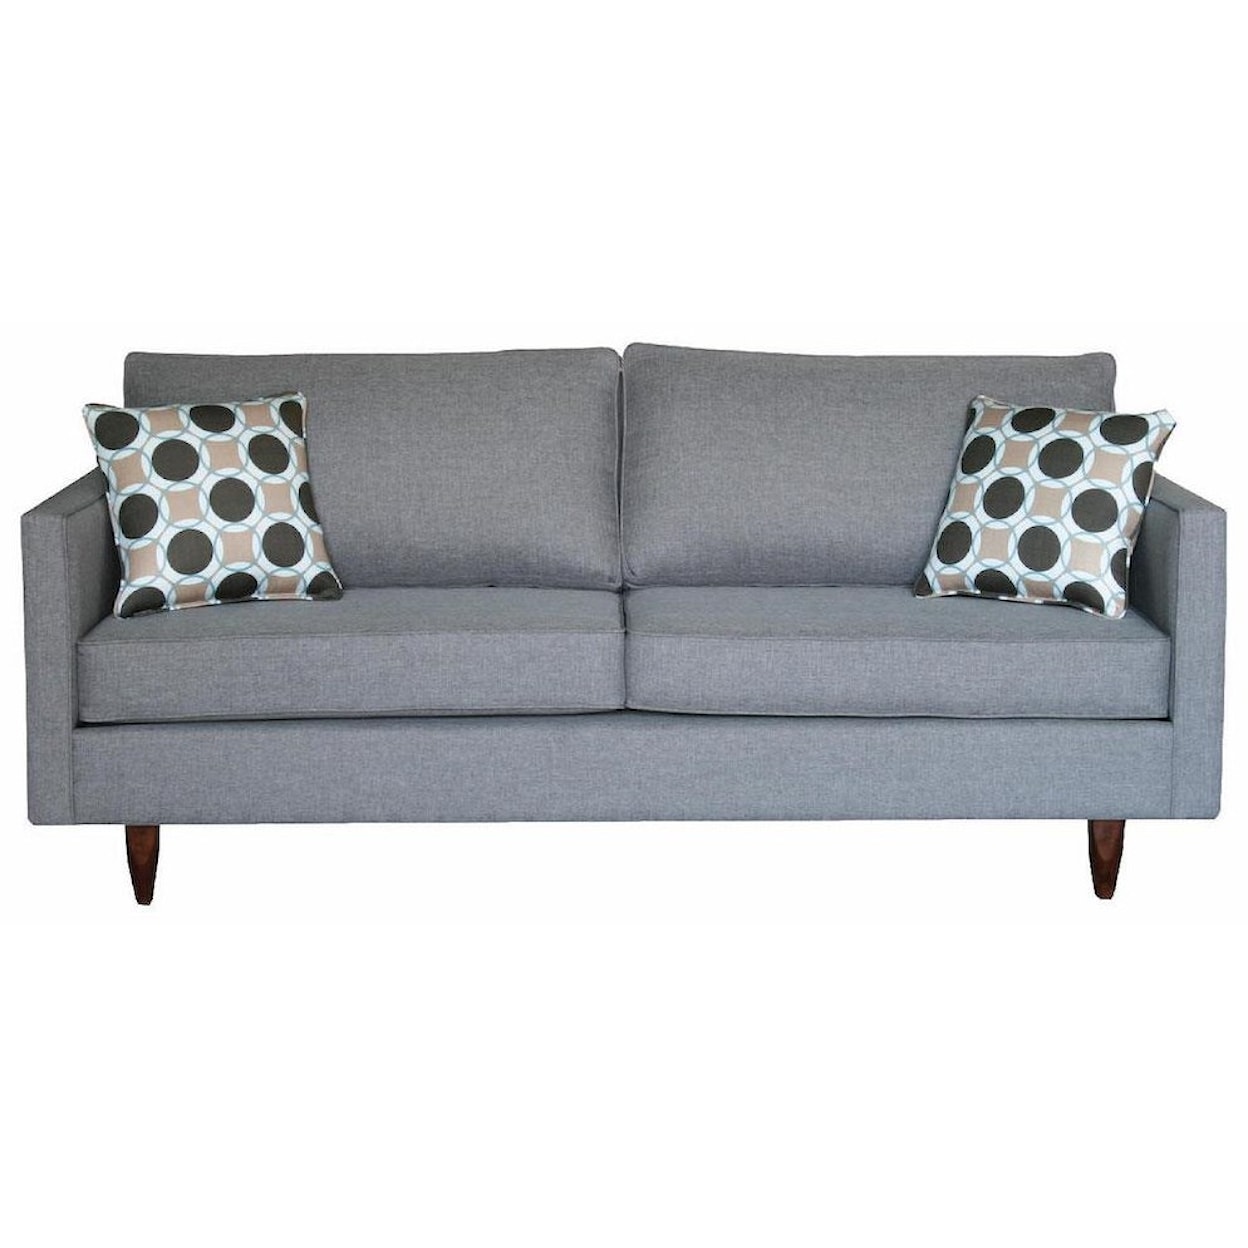 Sussex Upholstery Co. Taylor 2 Cushion Sofa